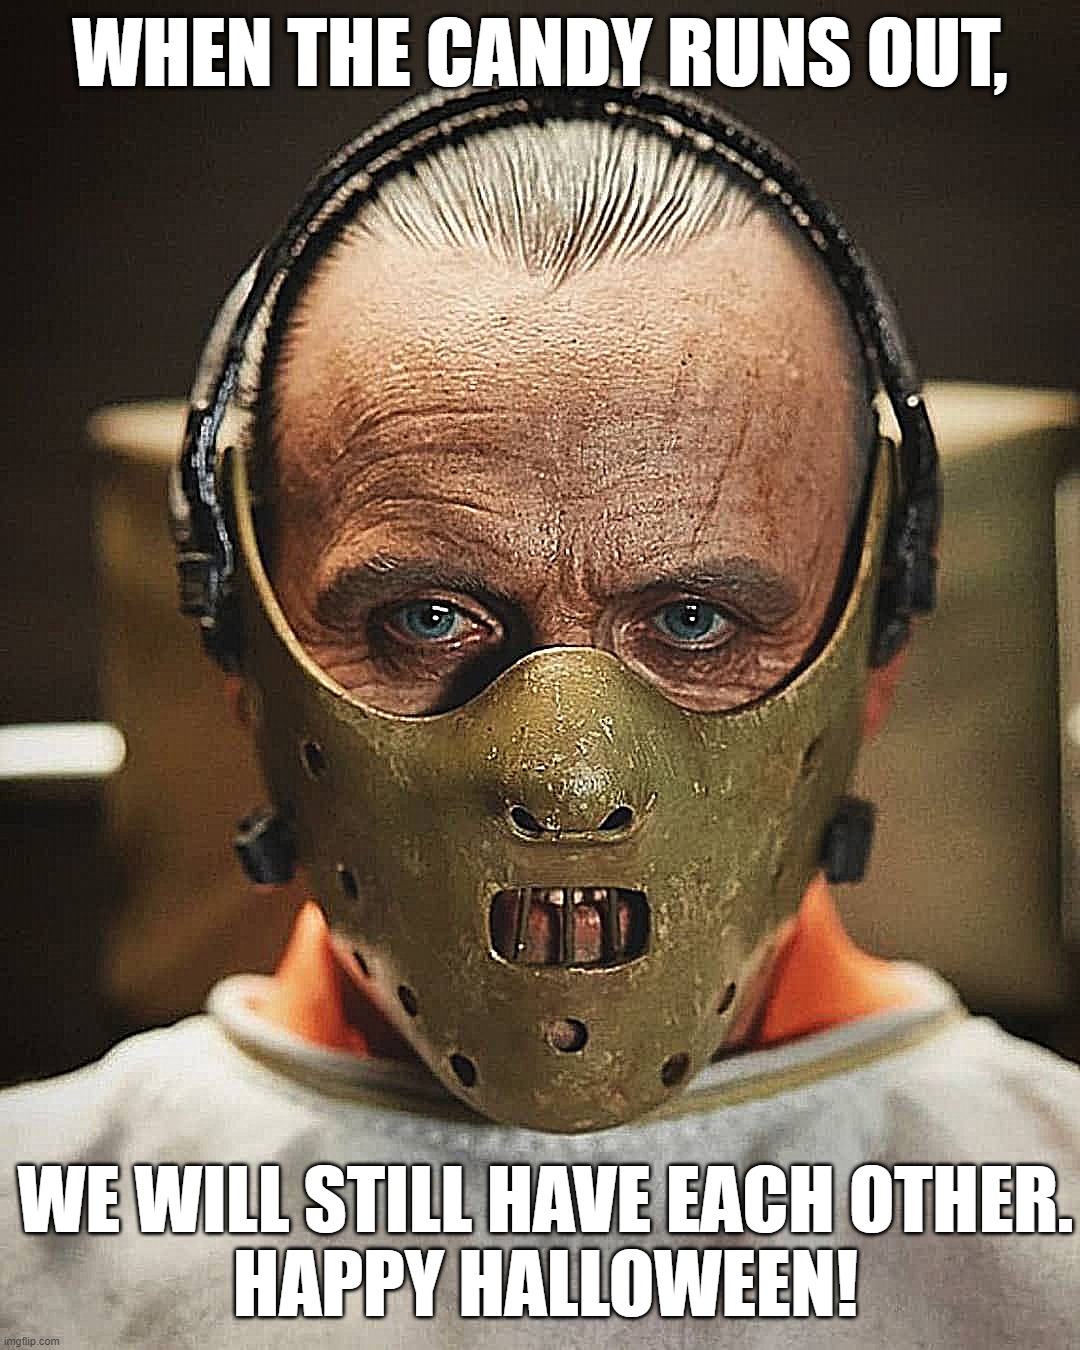 Happy Halloween from Hannibal Lecter | WHEN THE CANDY RUNS OUT, WE WILL STILL HAVE EACH OTHER.
HAPPY HALLOWEEN! | image tagged in halloween,halloween is coming,hannibal lecter silence of the lambs,silence of the lambs,hannibal lecter,candy | made w/ Imgflip meme maker